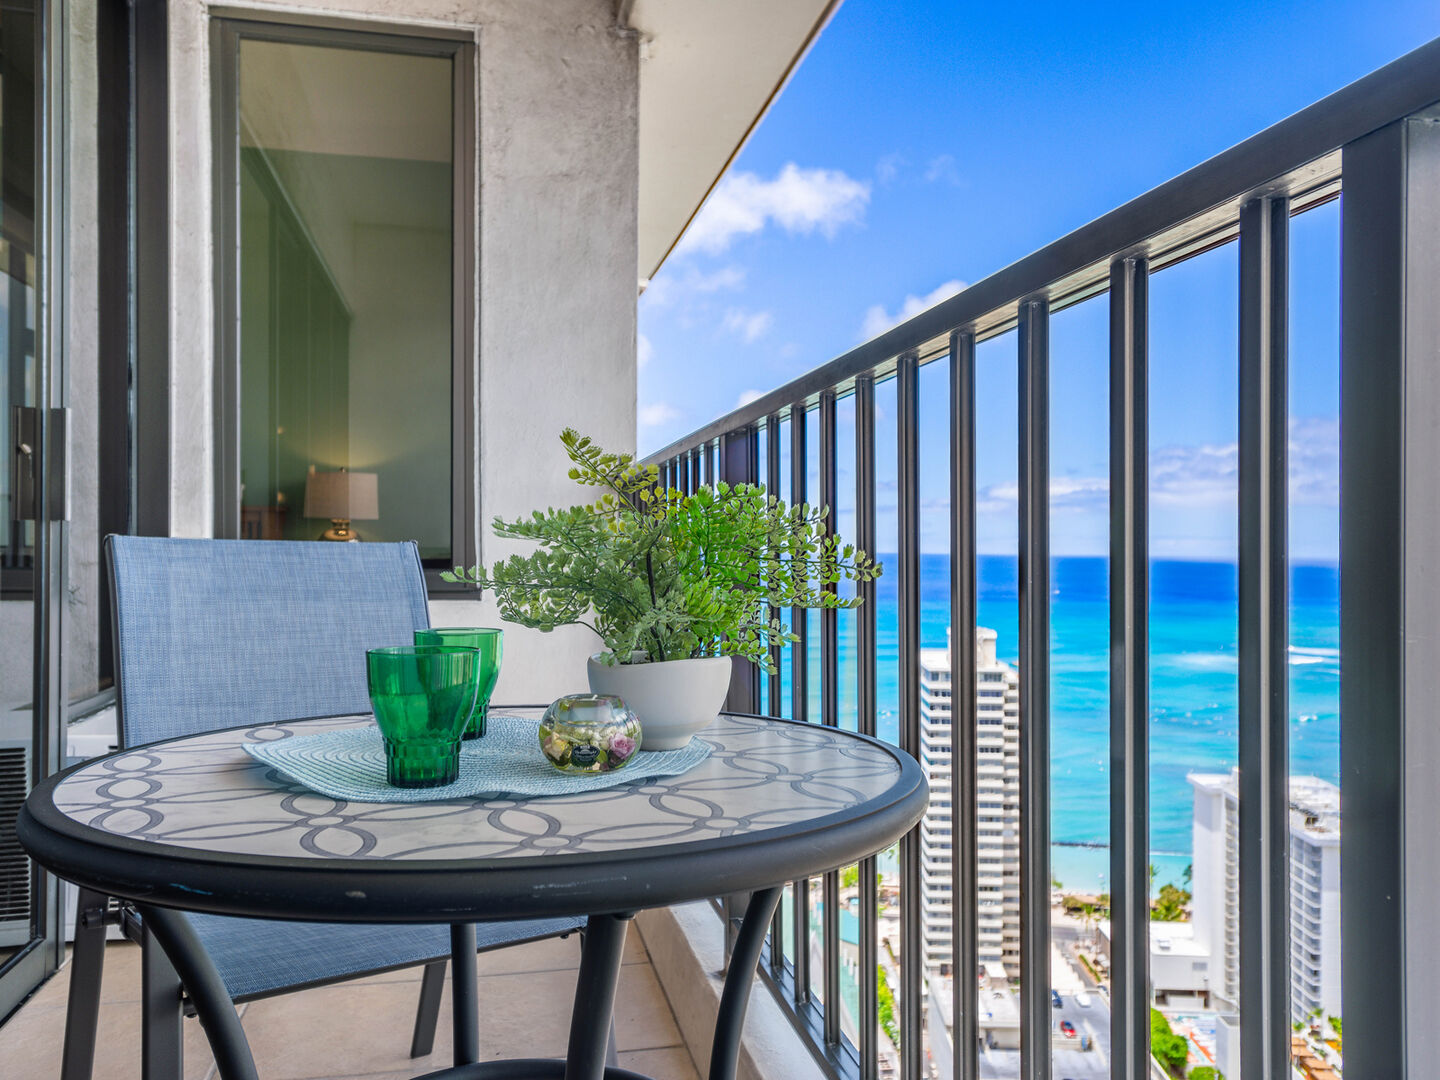 Enjoy your coffee in the morning on the lanai and enjoy the Ocean views